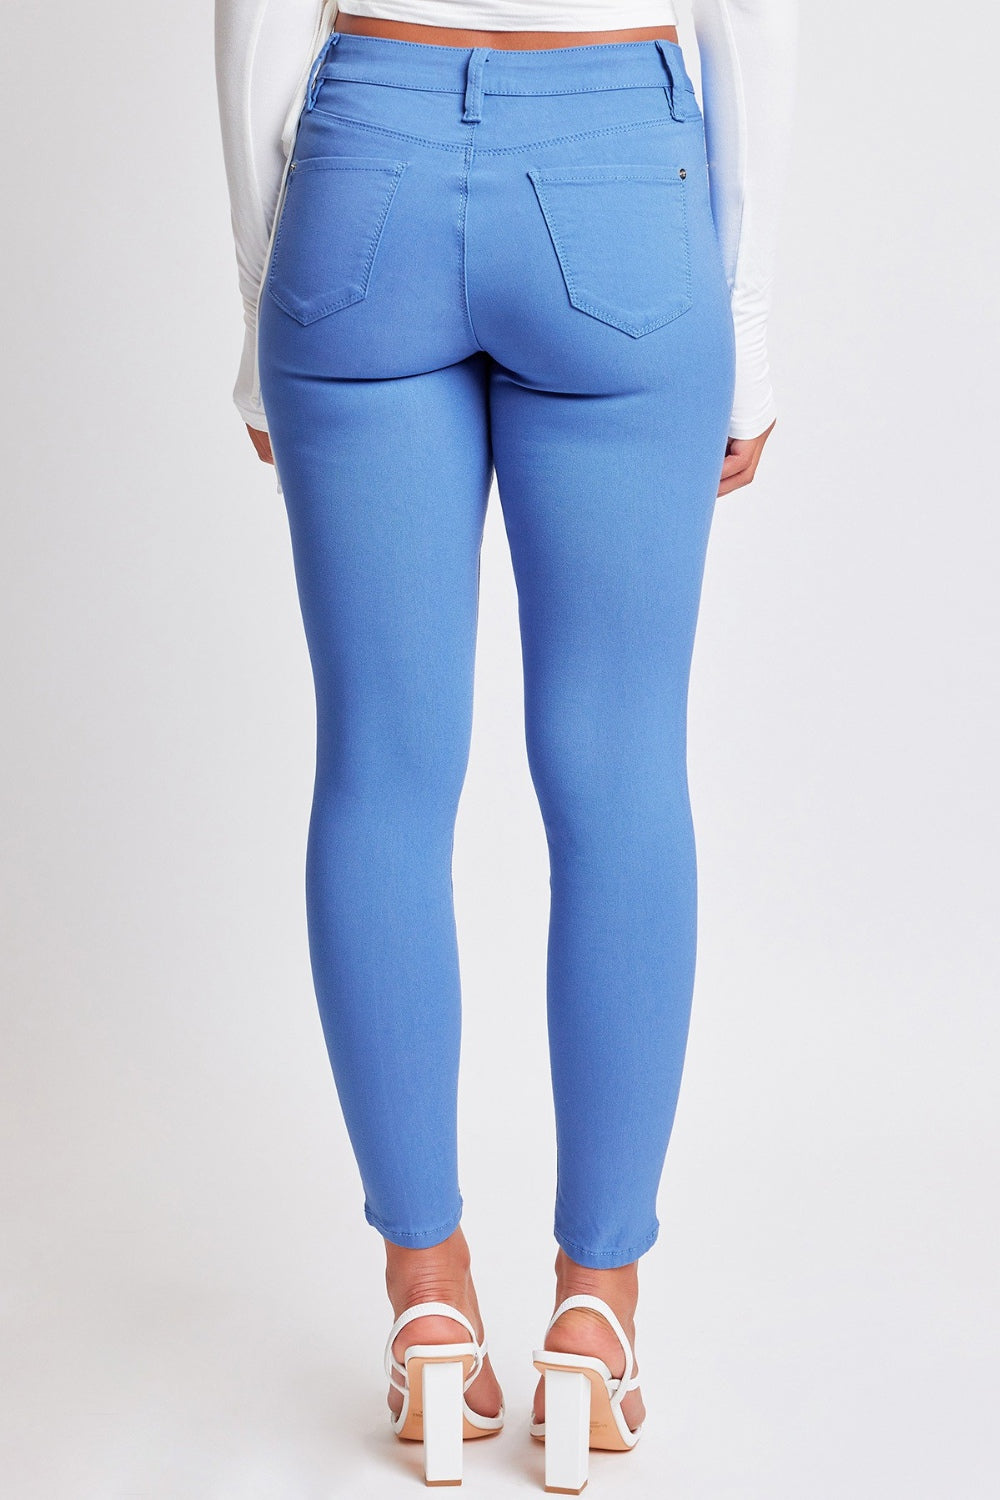 Morgan Hyperstretch Mid-Rise Skinny Pants in Blue